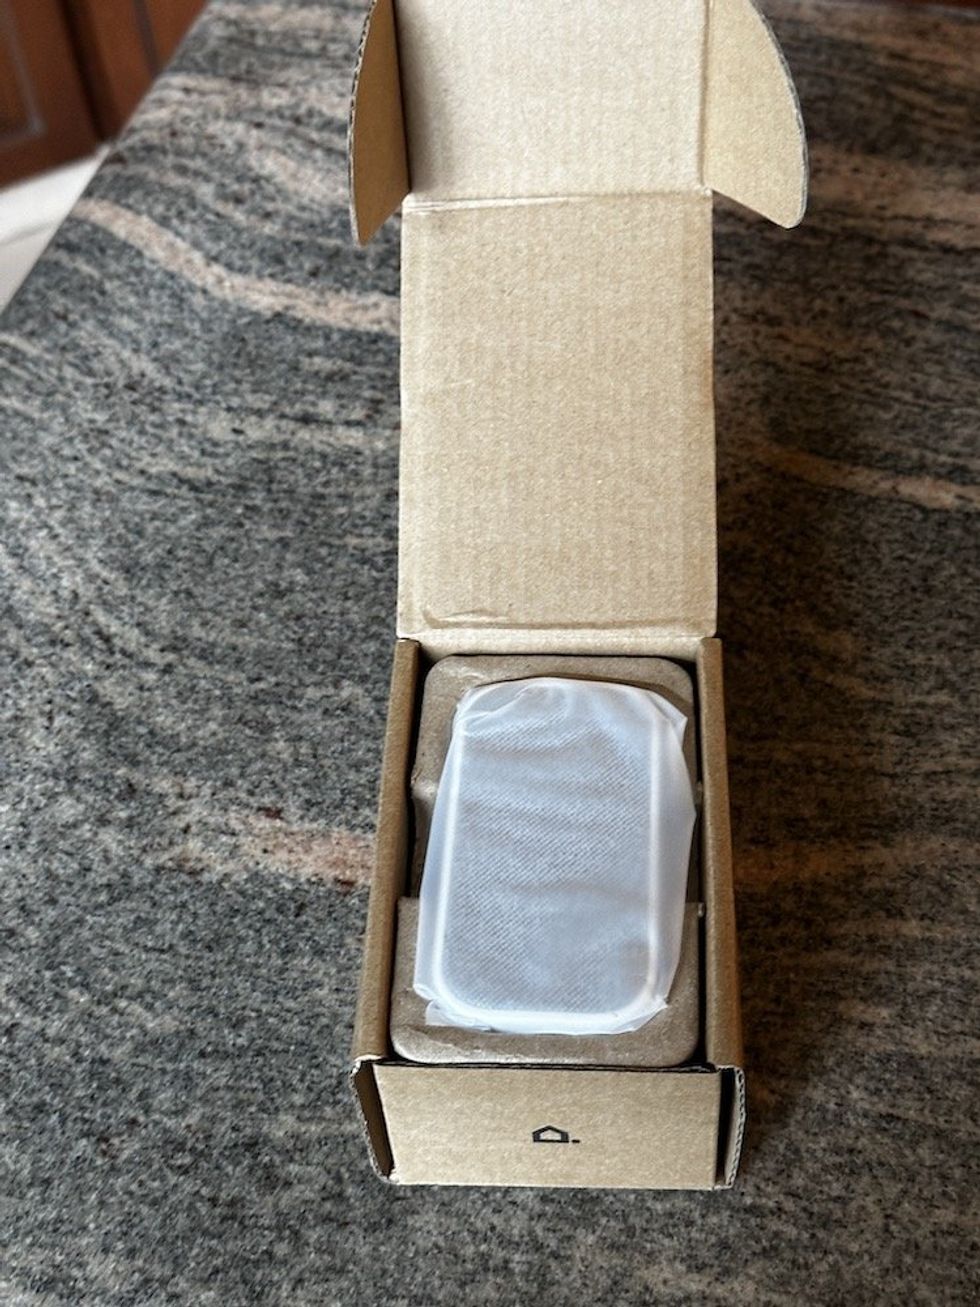 a photo of the vivint chimer extender box opened